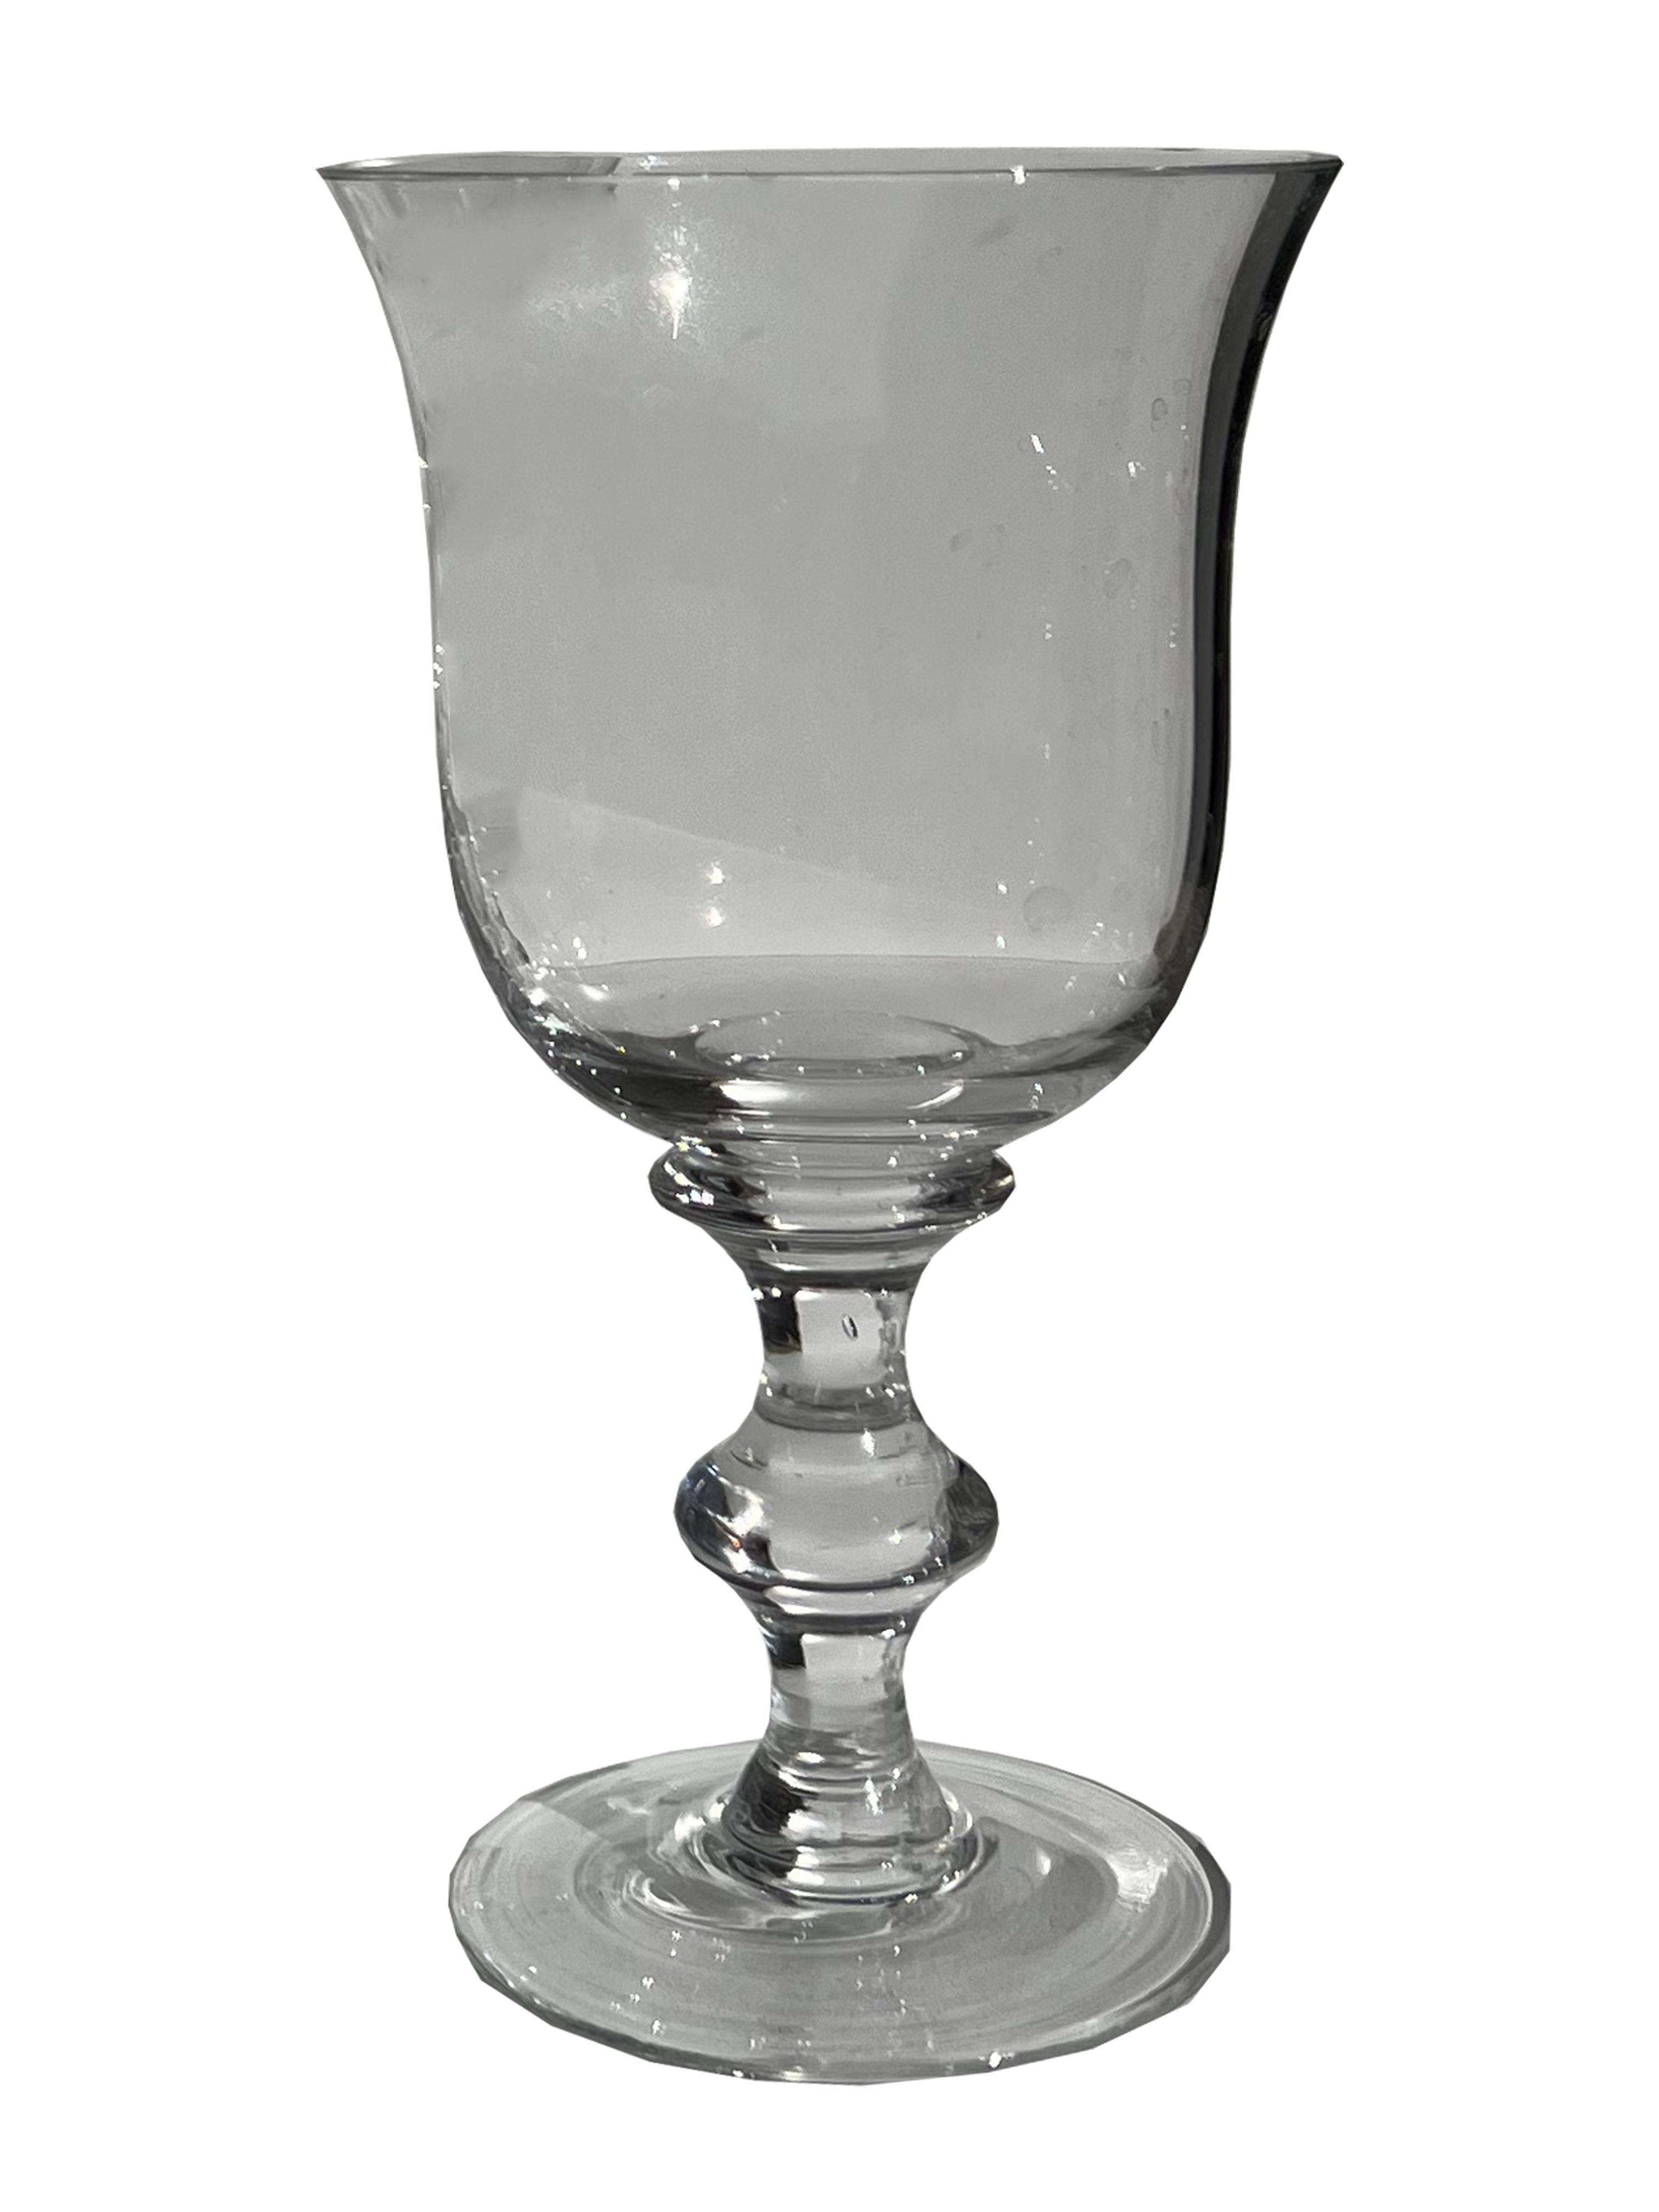 Indulge in the charm of vintage tableware with our set of 6 glass wine goblets, perfectly designed to enhance your wine-drinking experience. These glasses feature a wide fluted rim, providing a comfortable resting place for your lips as you savor